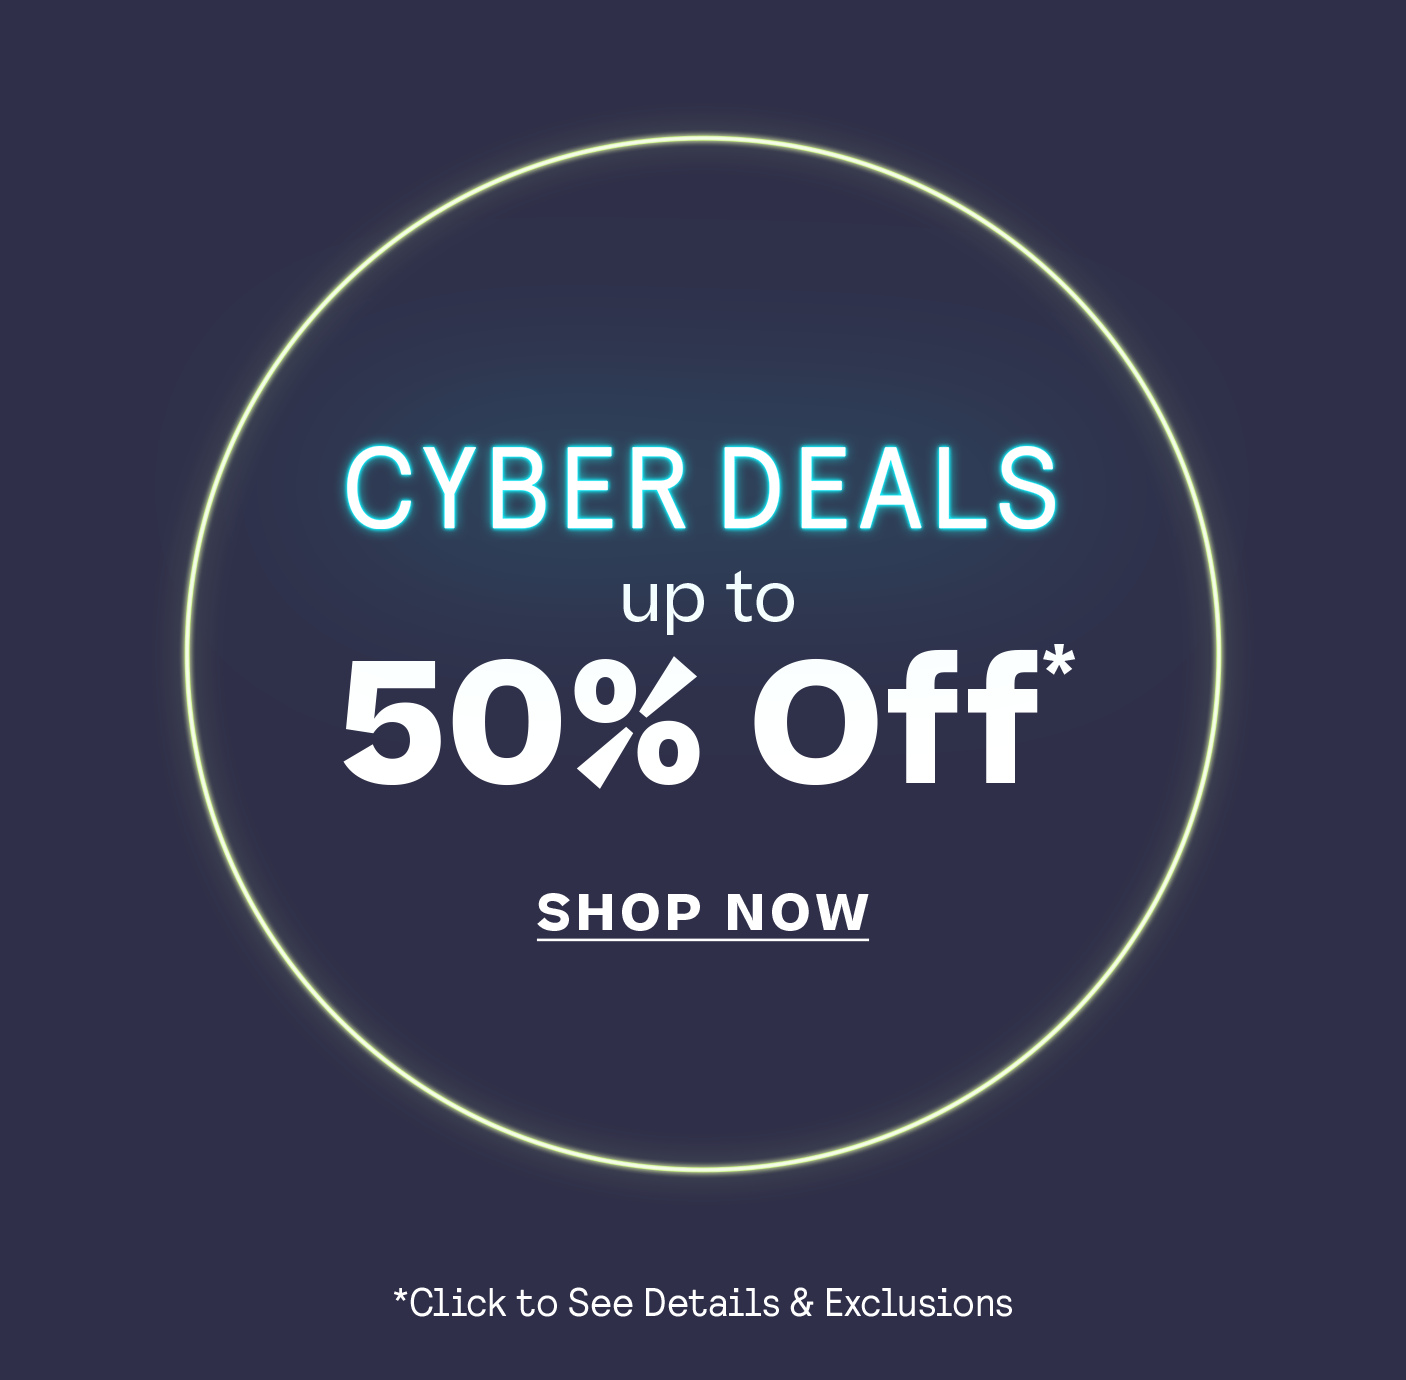 Cyber Deals: Up to 50% Off* *Click for details